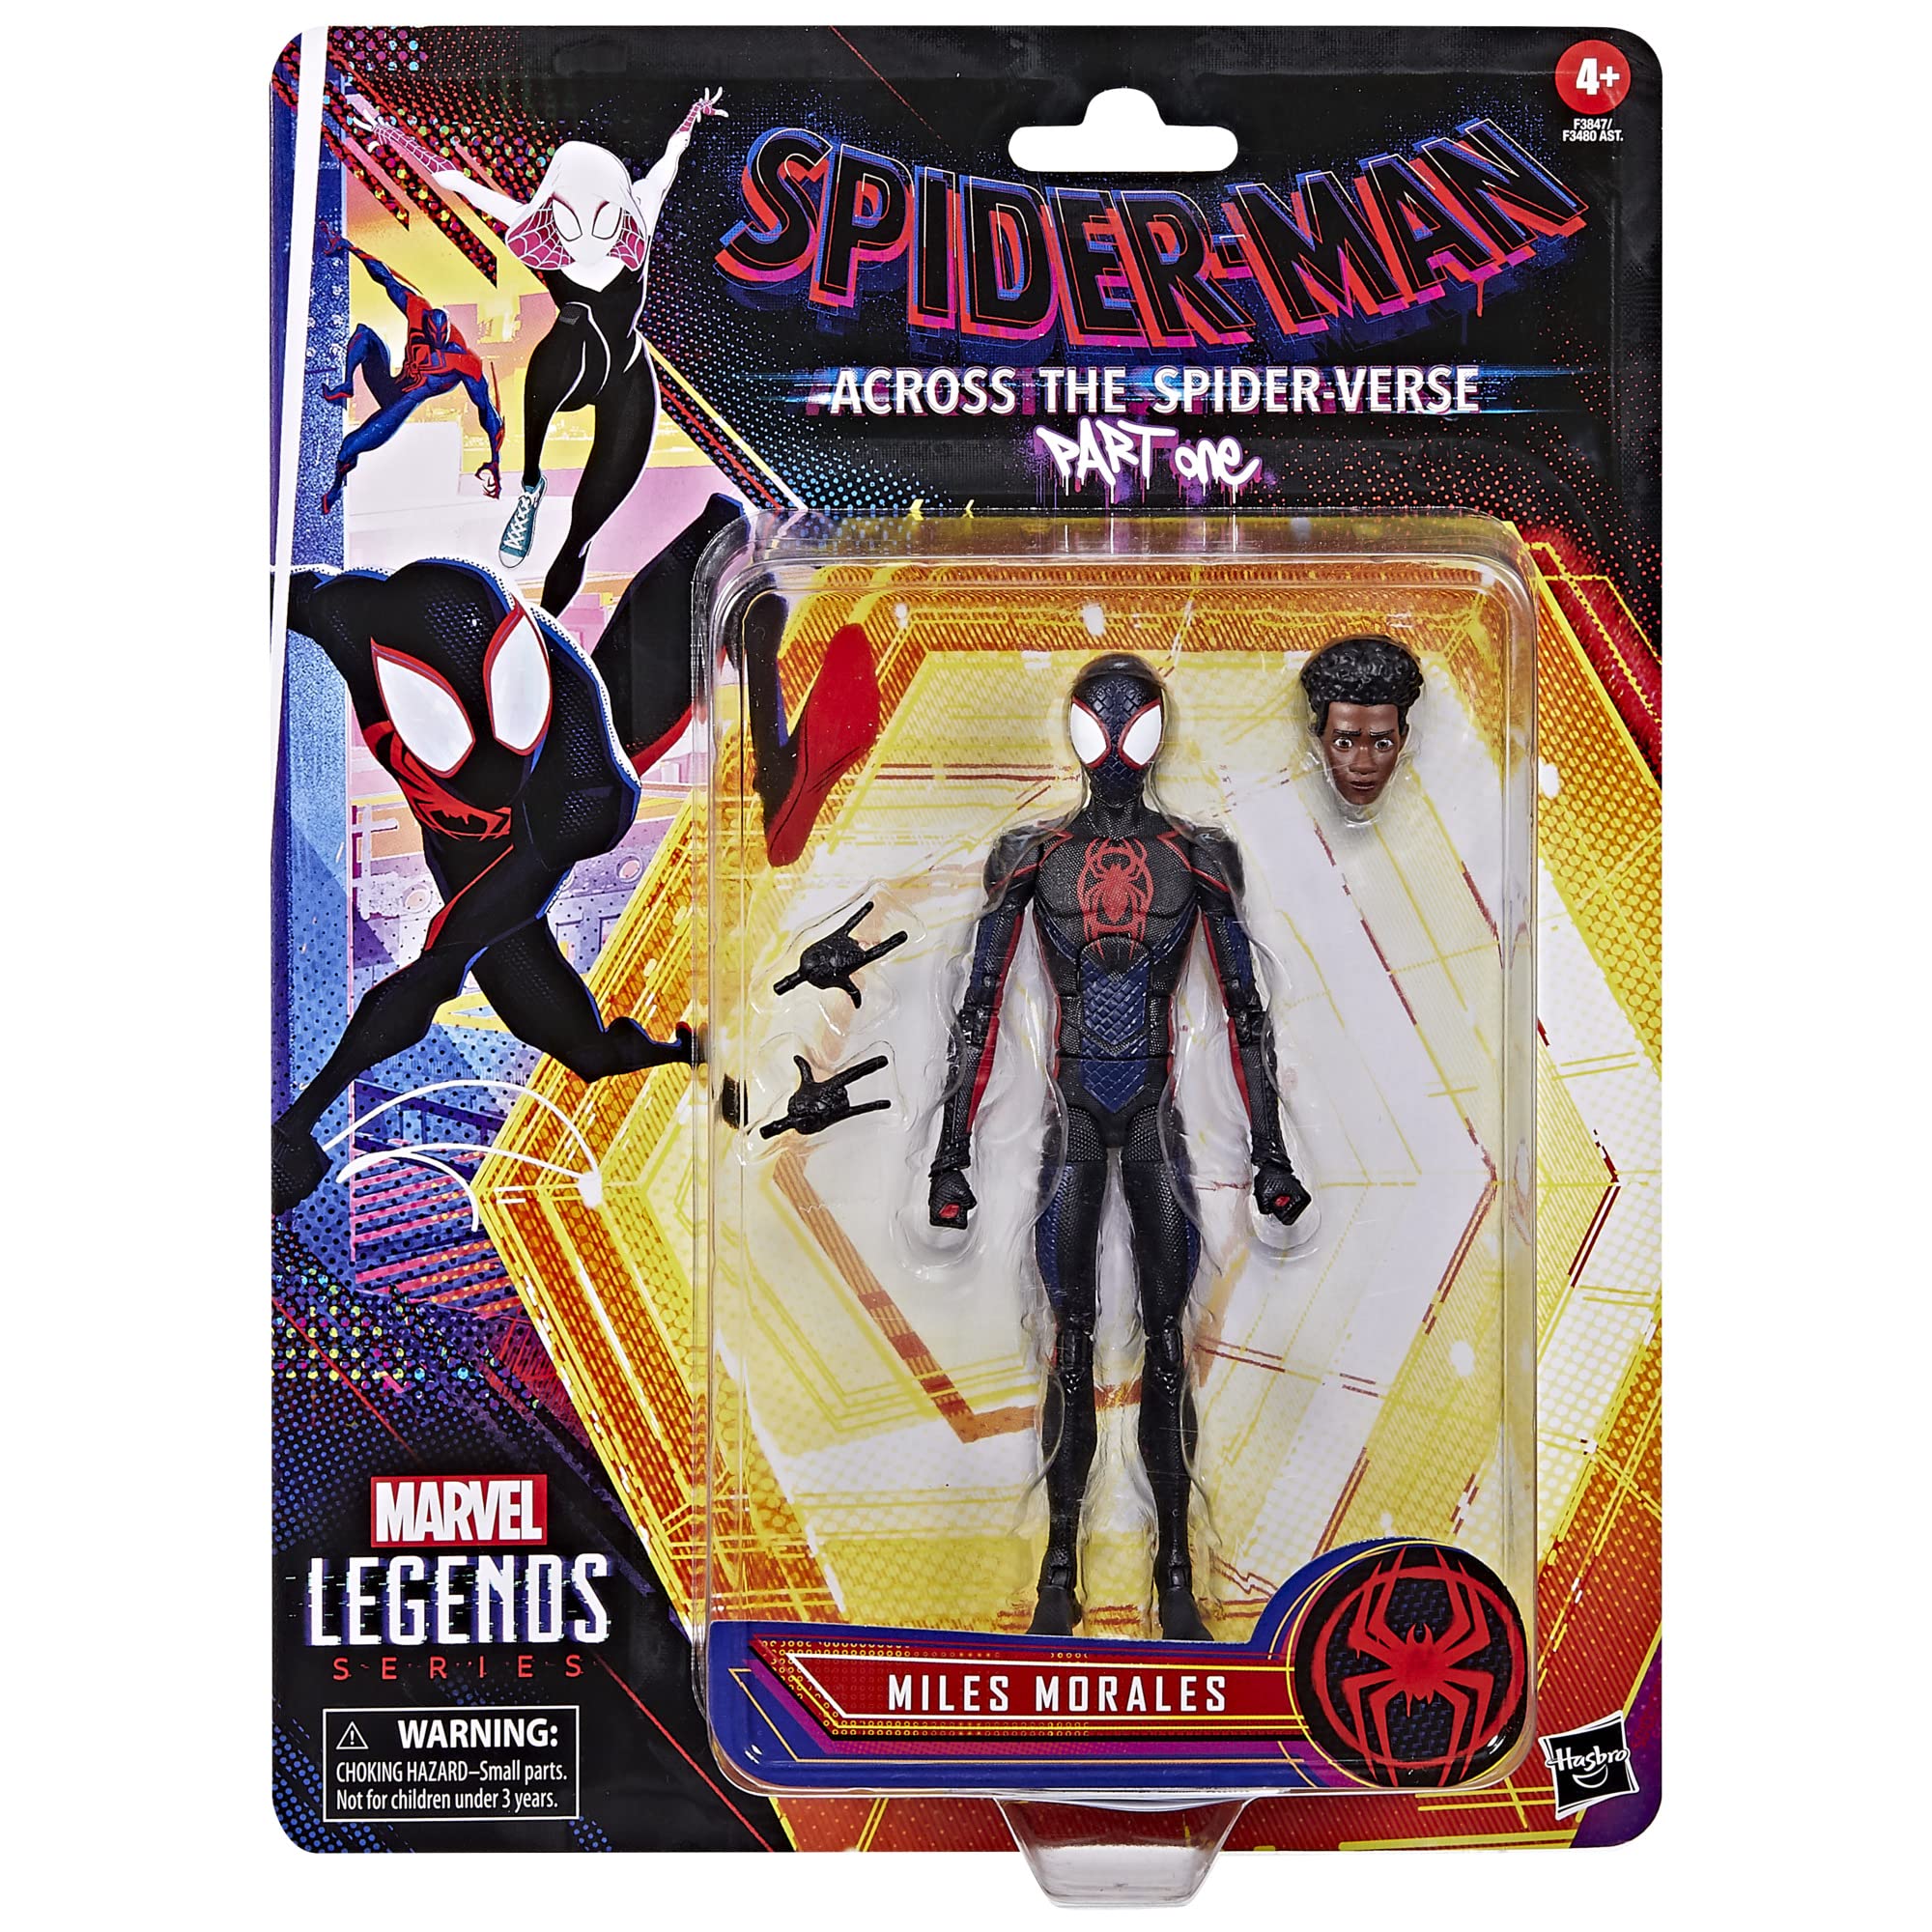 Spider-Man Marvel Legends Series Across The Spider-Verse Miles Morales 6-inch Action Figure Toy, 3 Accessories